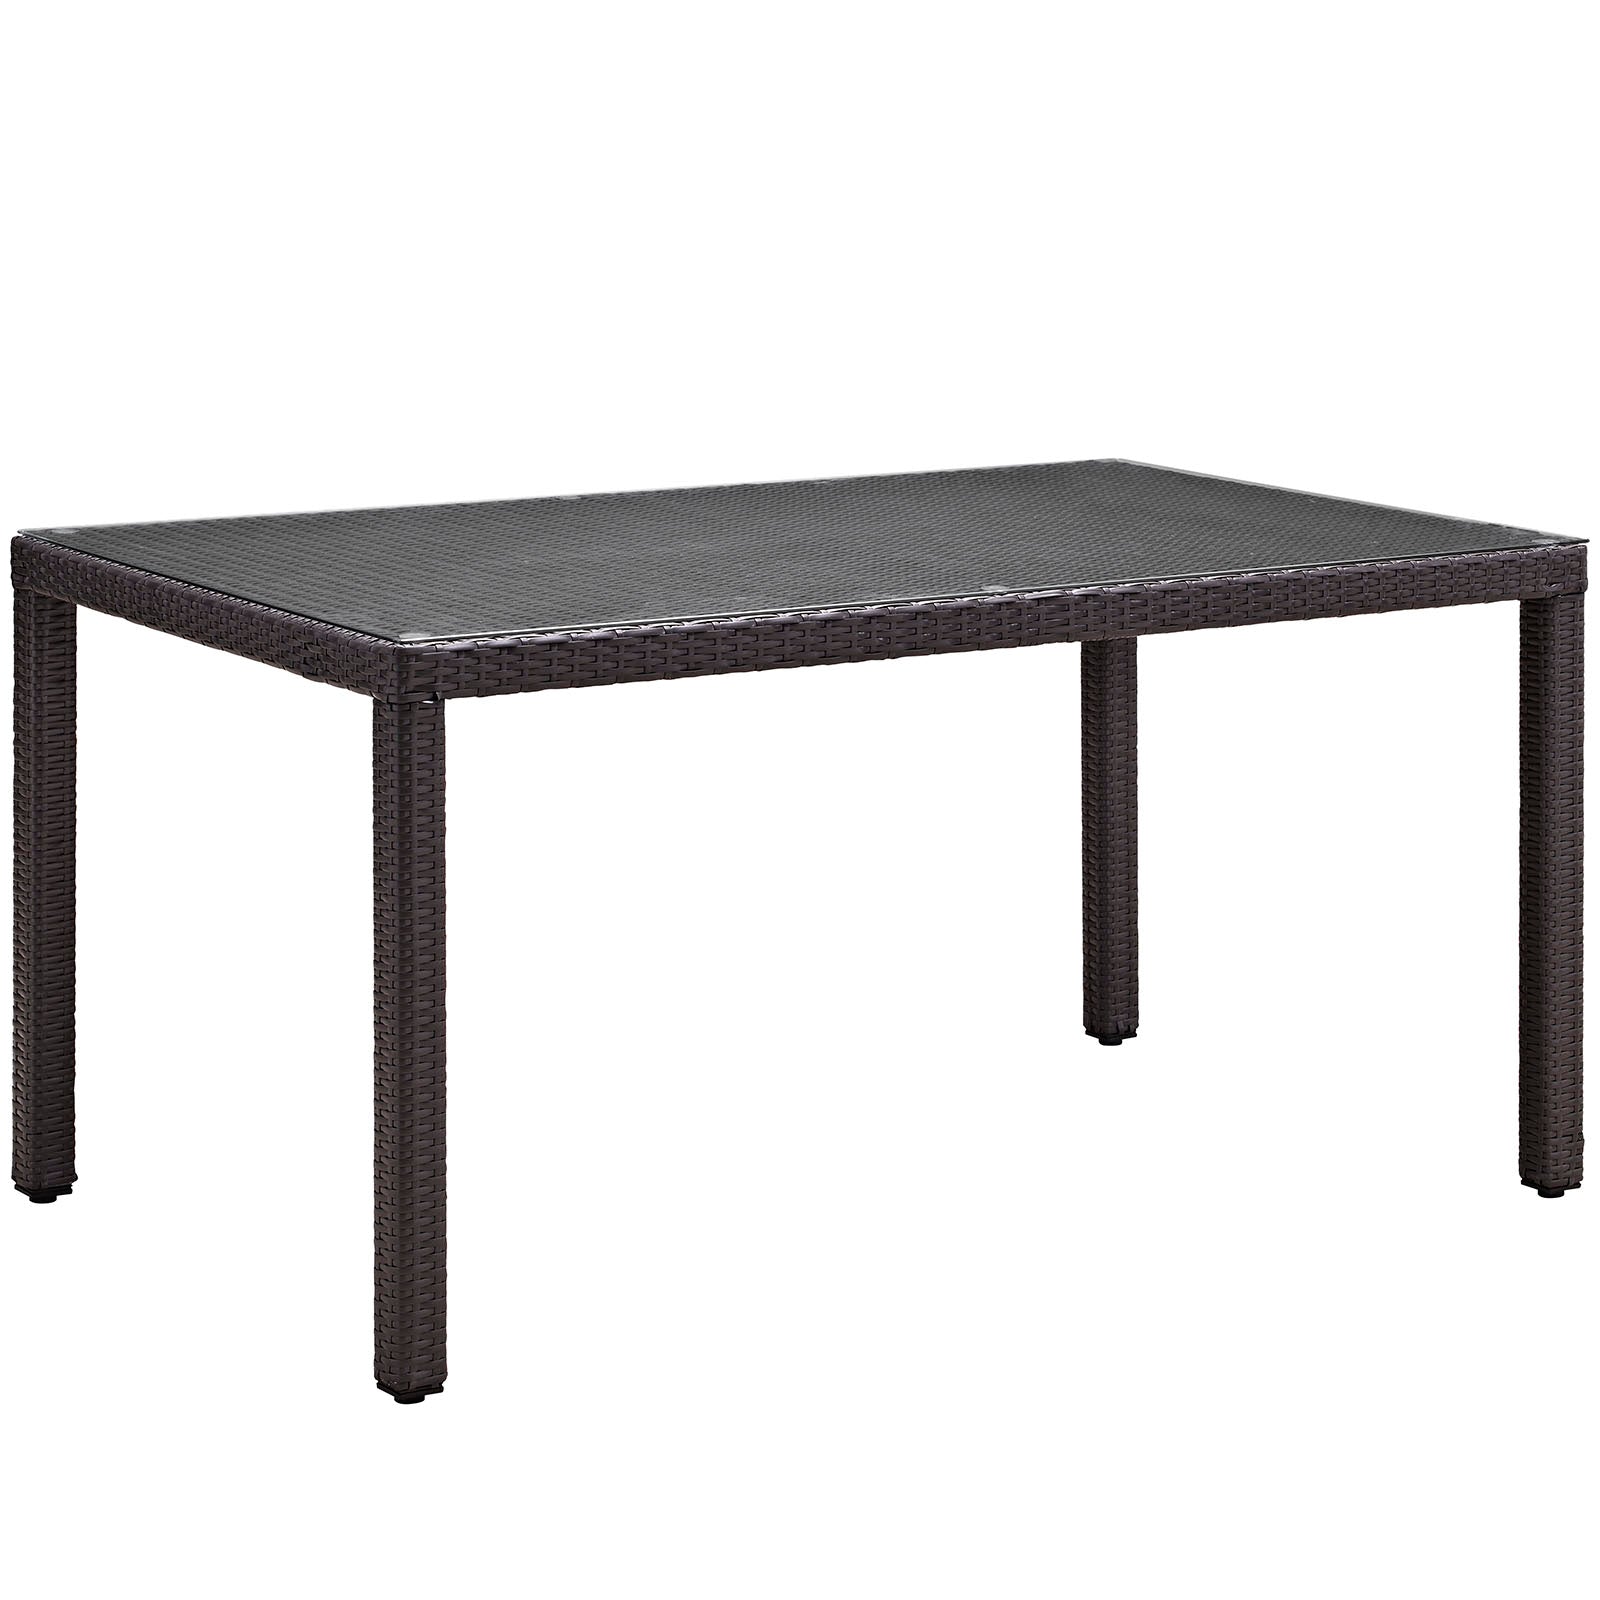 Modway Outdoor Dining Tables - Convene 59" Outdoor Dining Table Espresso